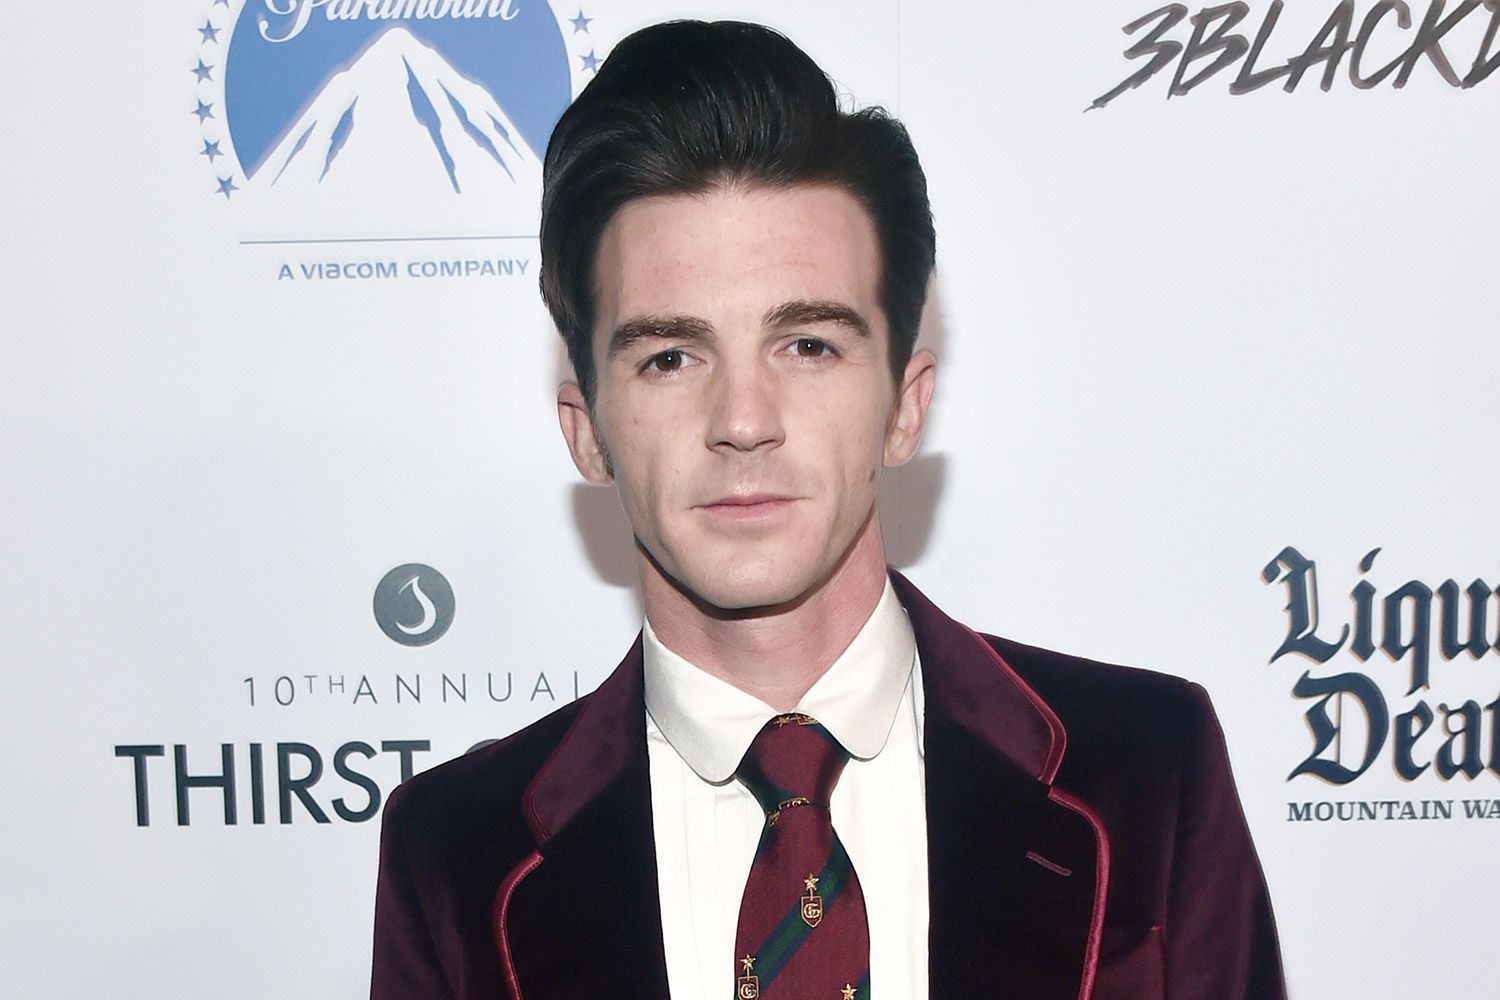 Drake Bell ‘Considered Missing and Endangered’ by Daytona Beach Police